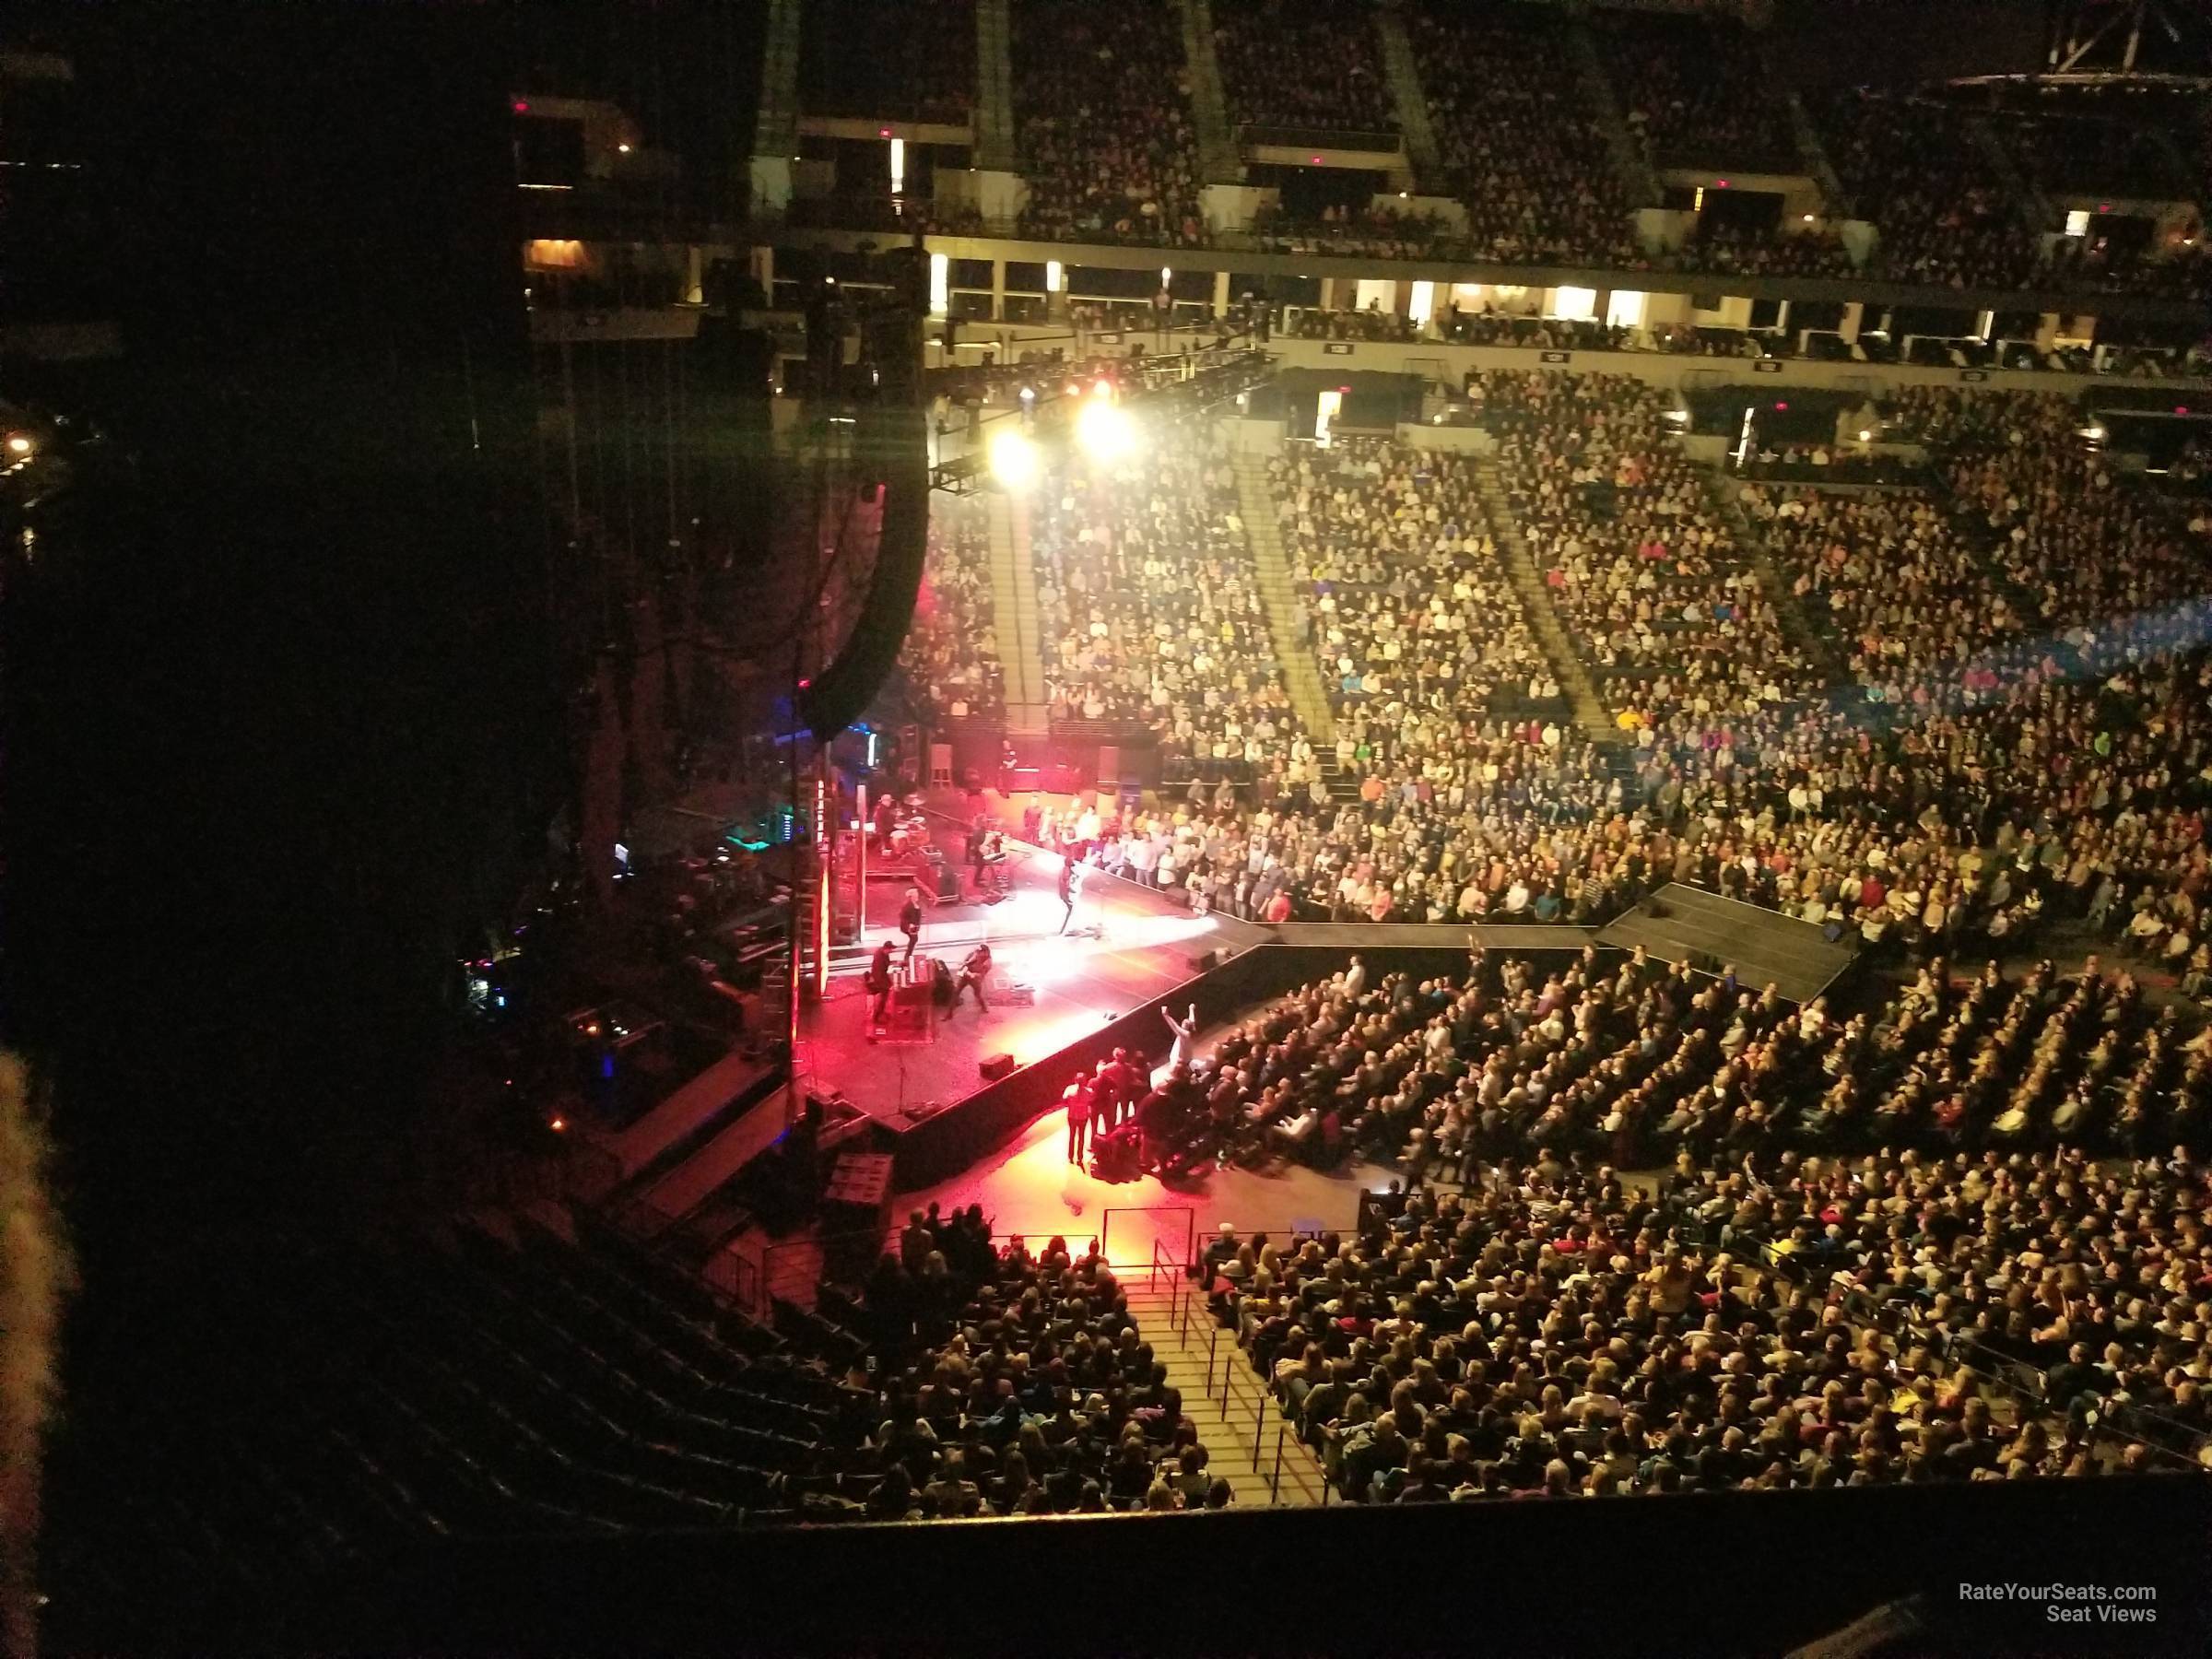 Section 214 at Target Center for Concerts